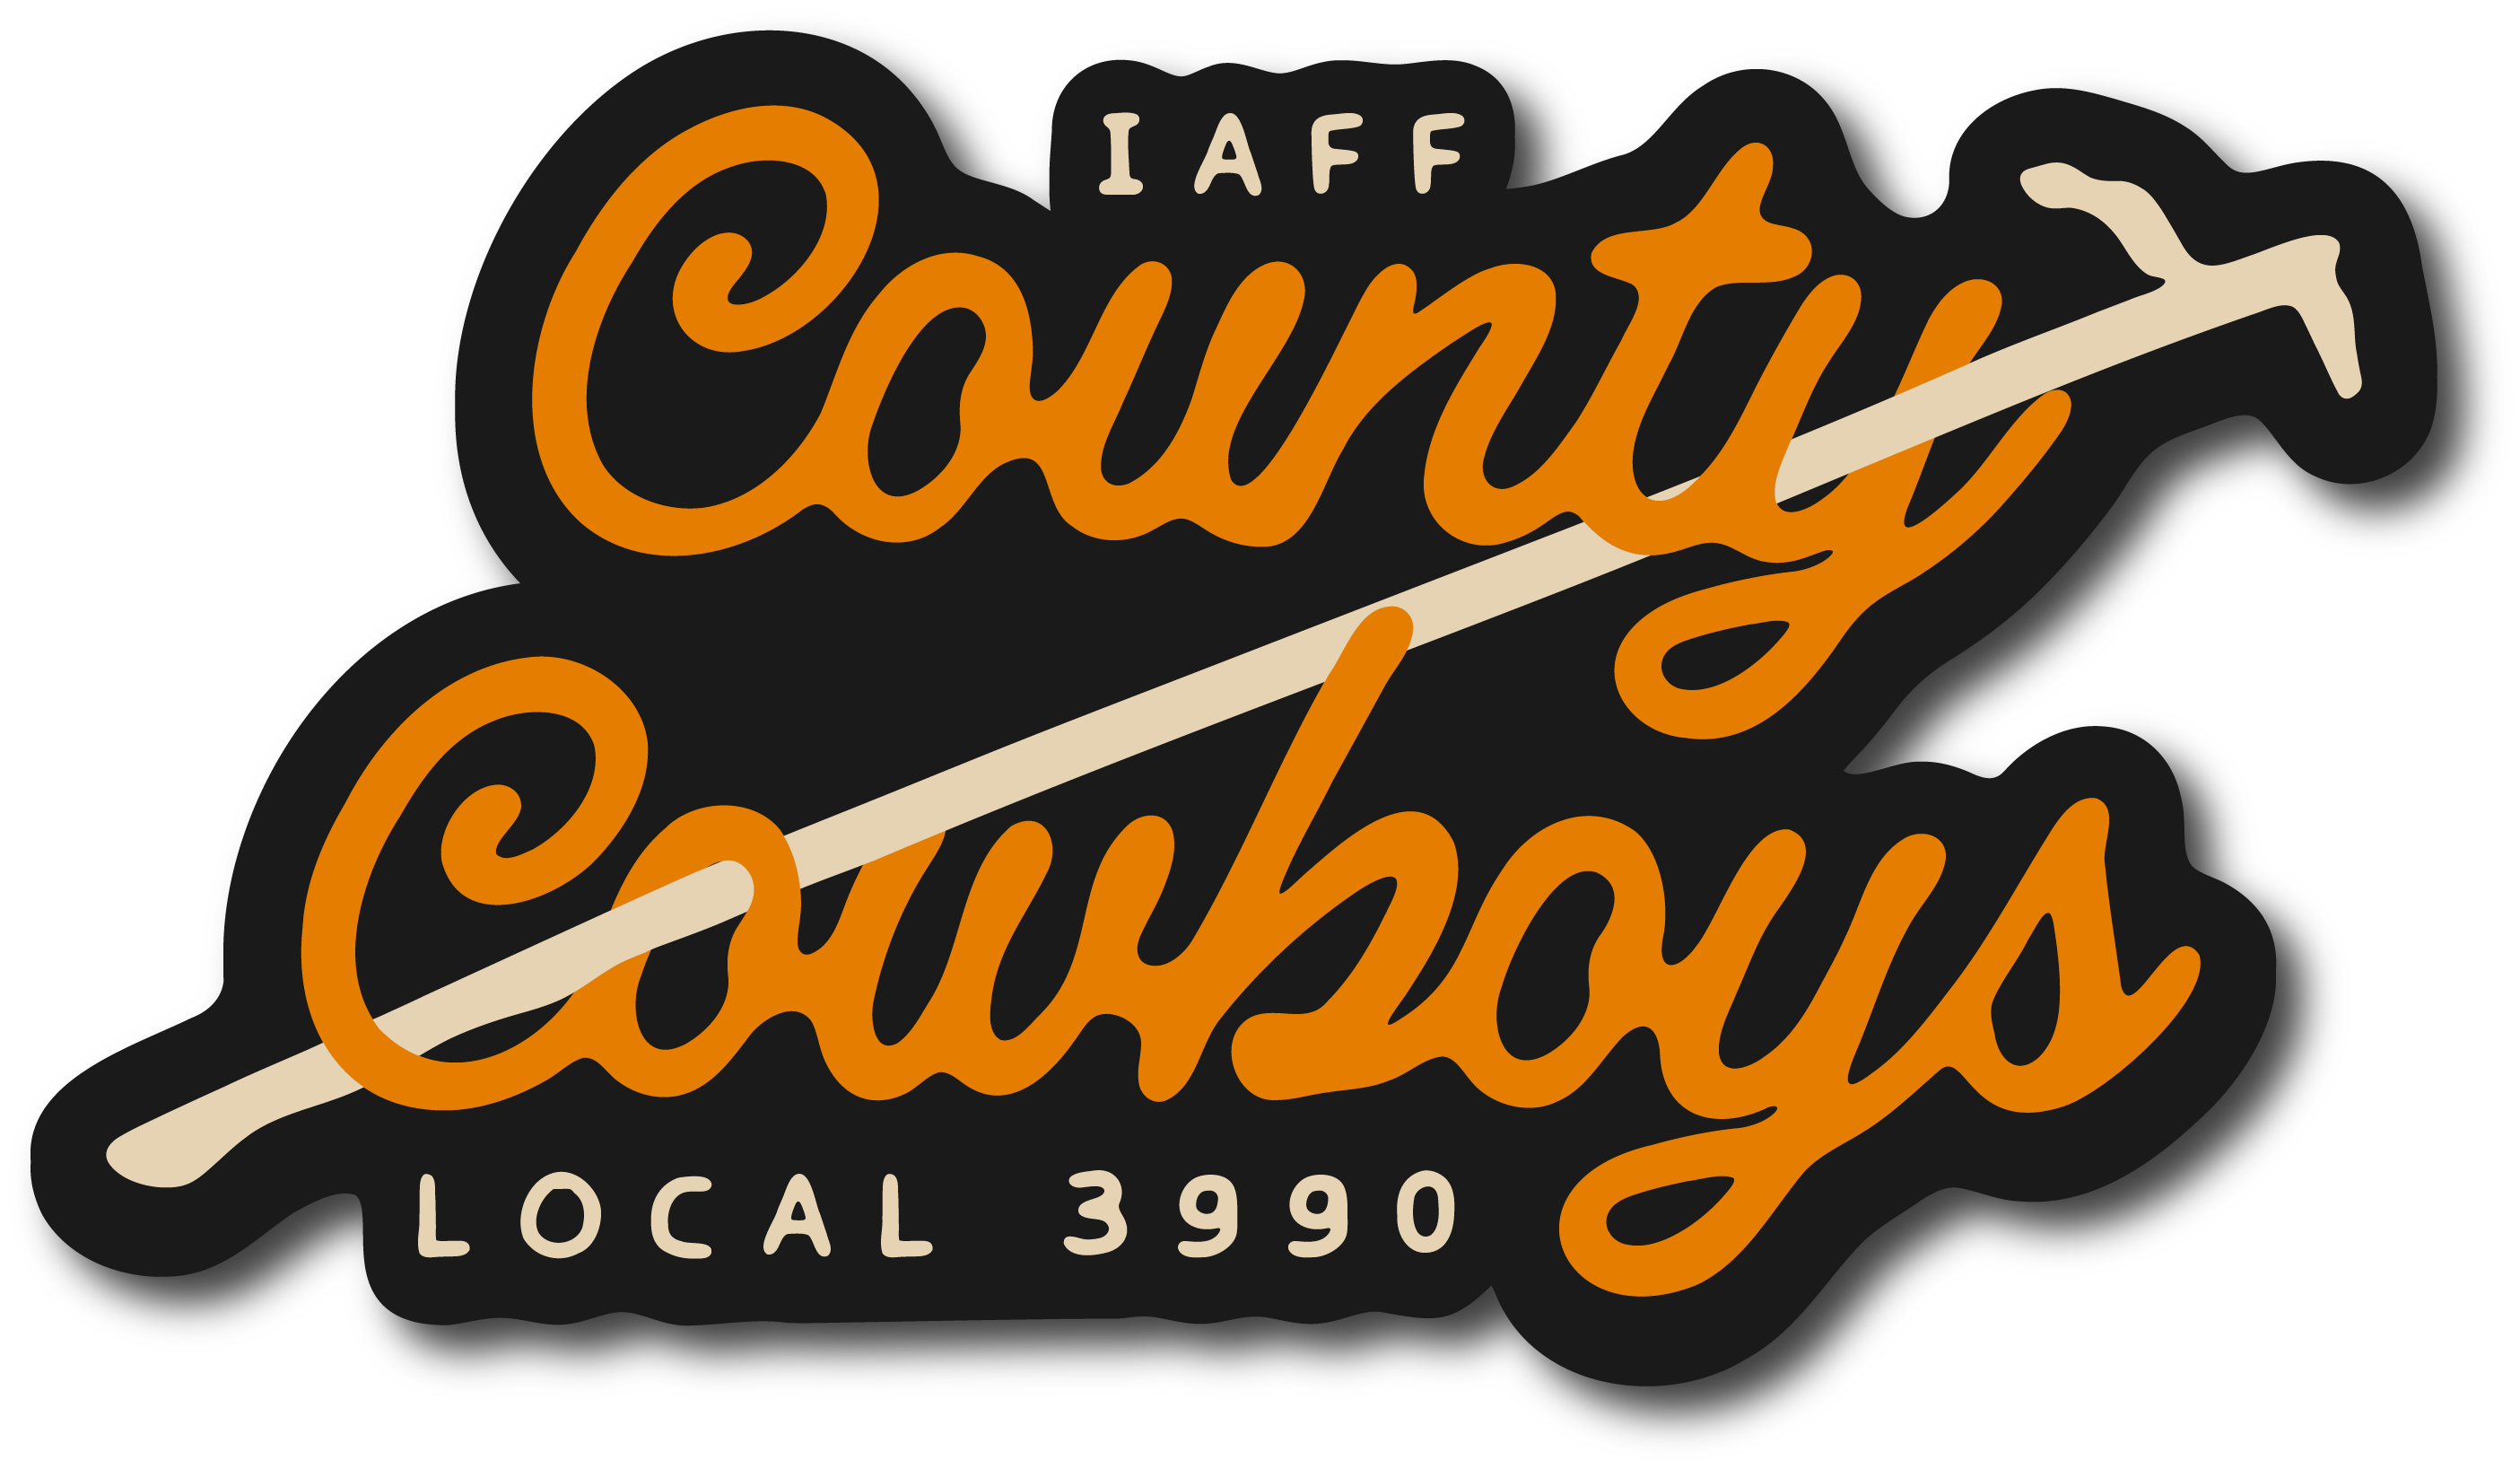 Local 3990 &quot;County Cowboys&quot; Decal